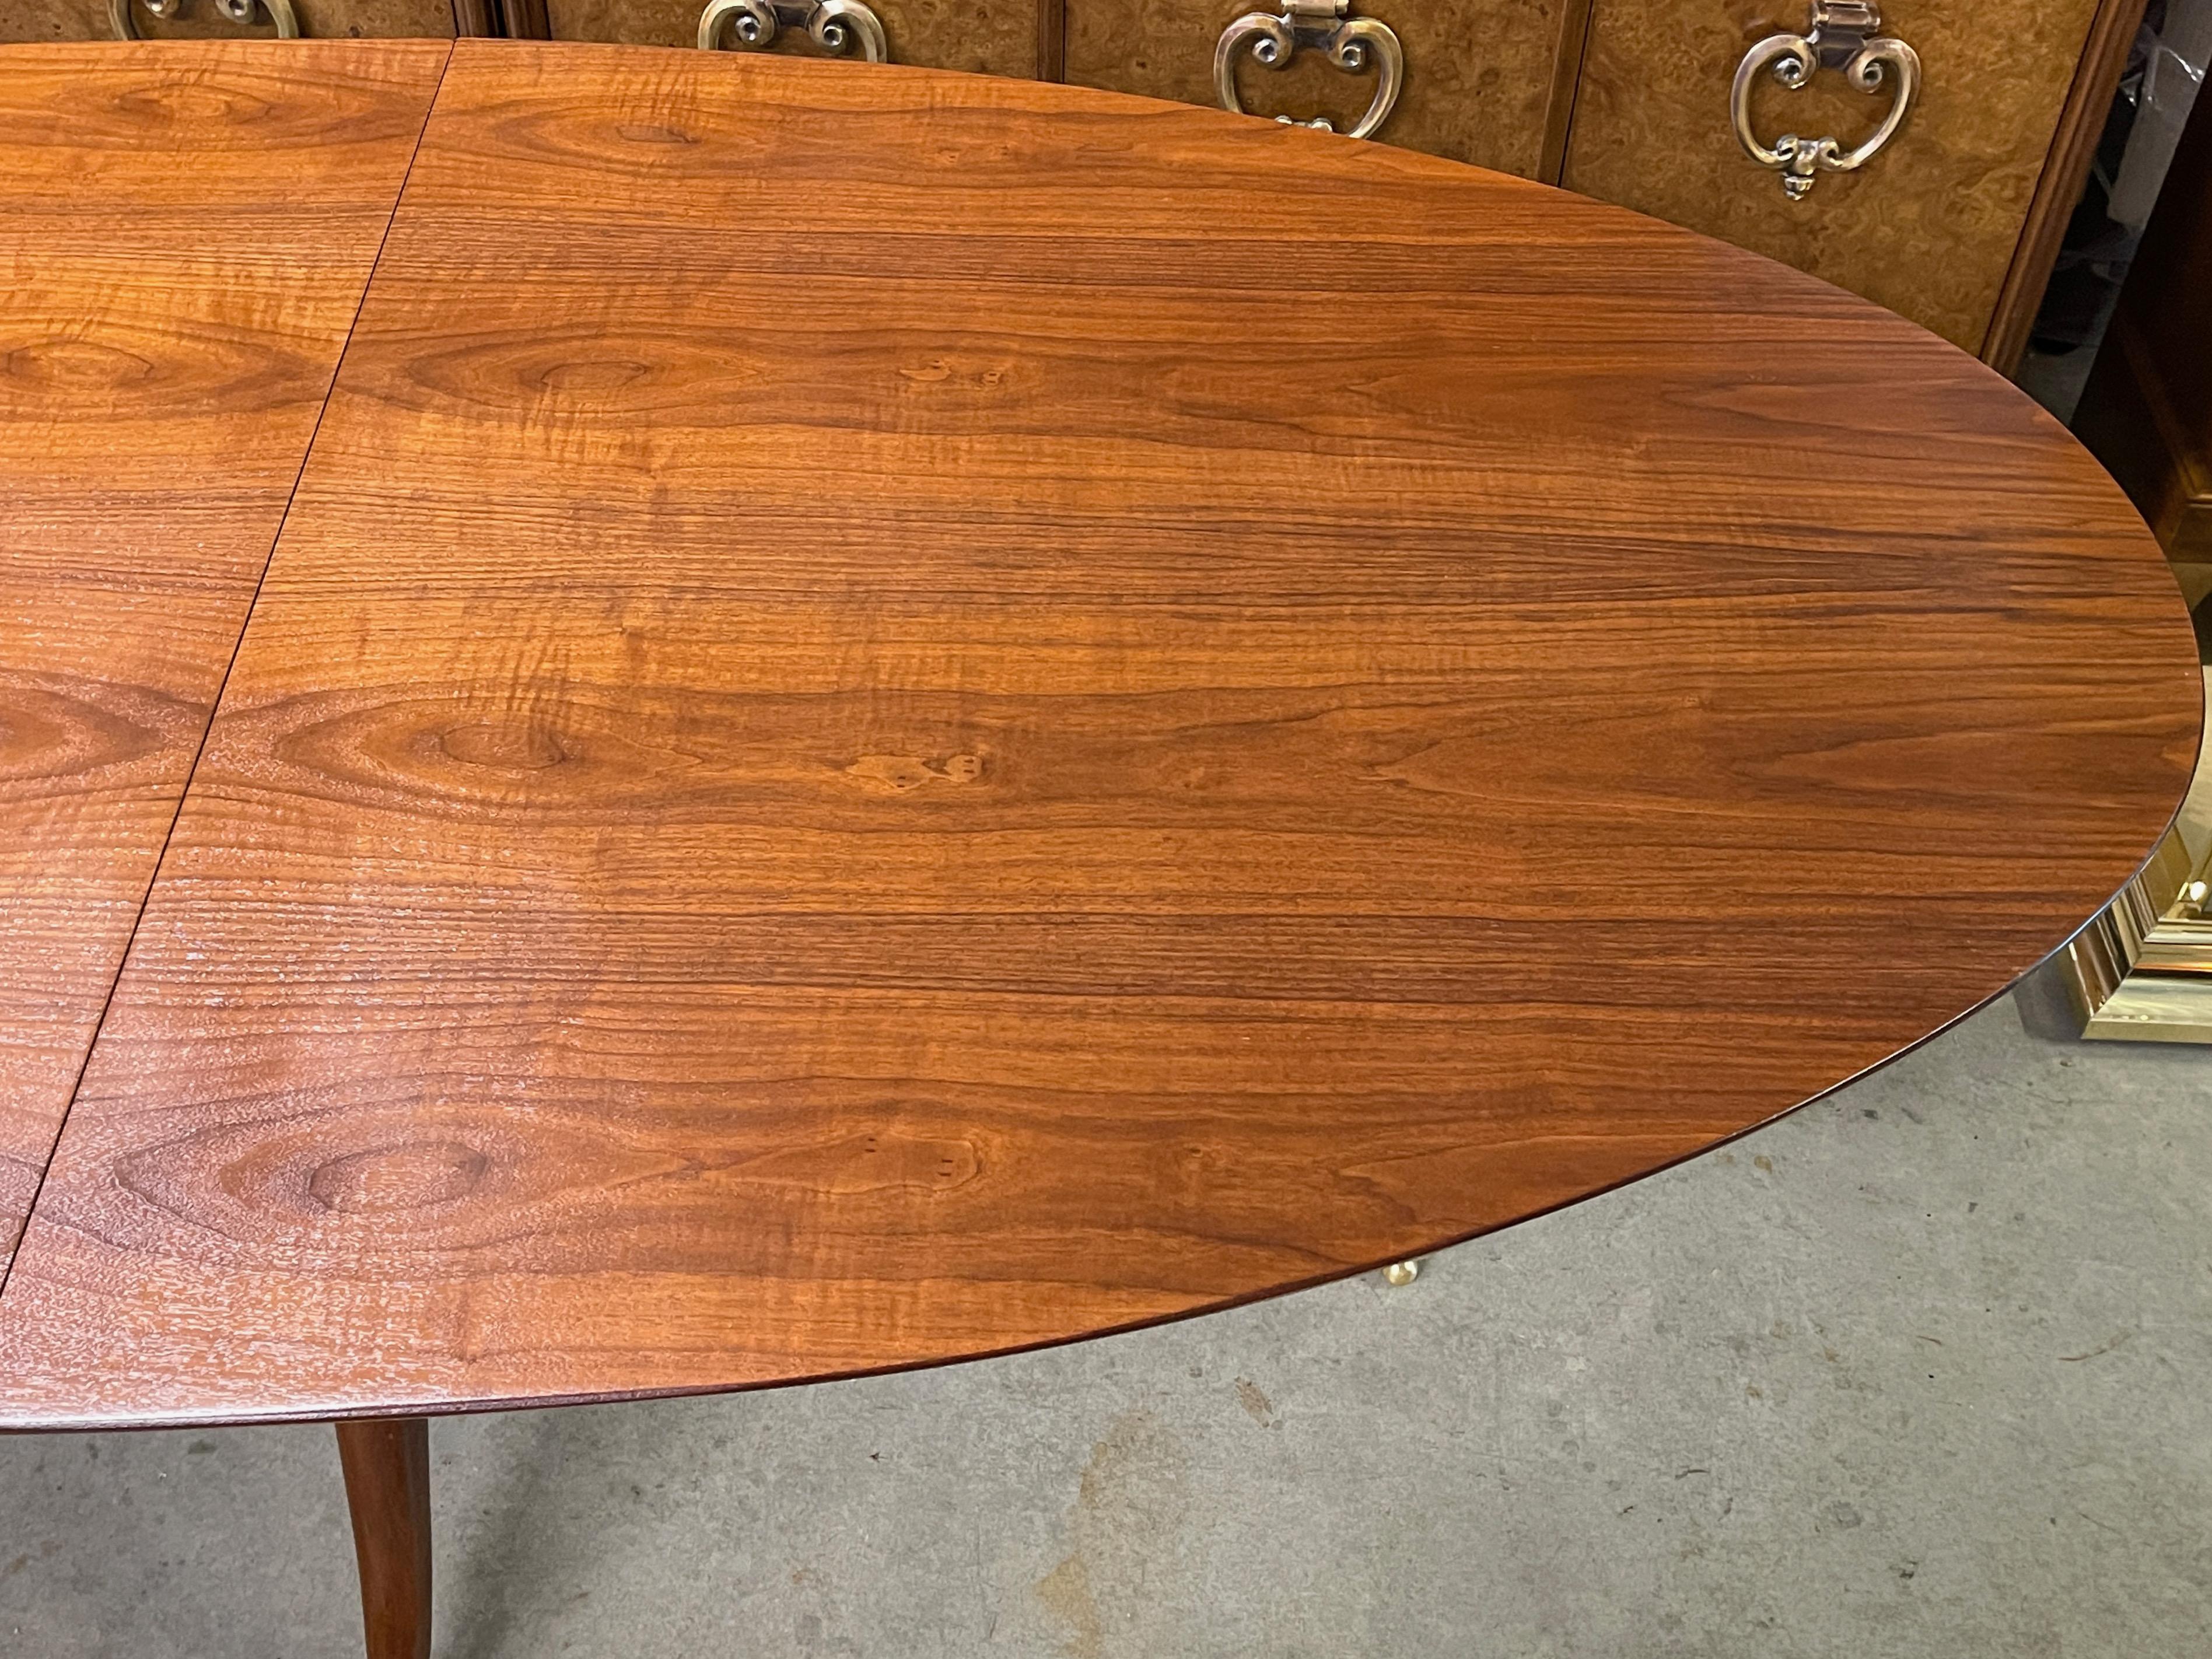 Mid-20th Century Elliptical Oval Dining Table by Adolfo Genovese for F&G Handmade Furniture